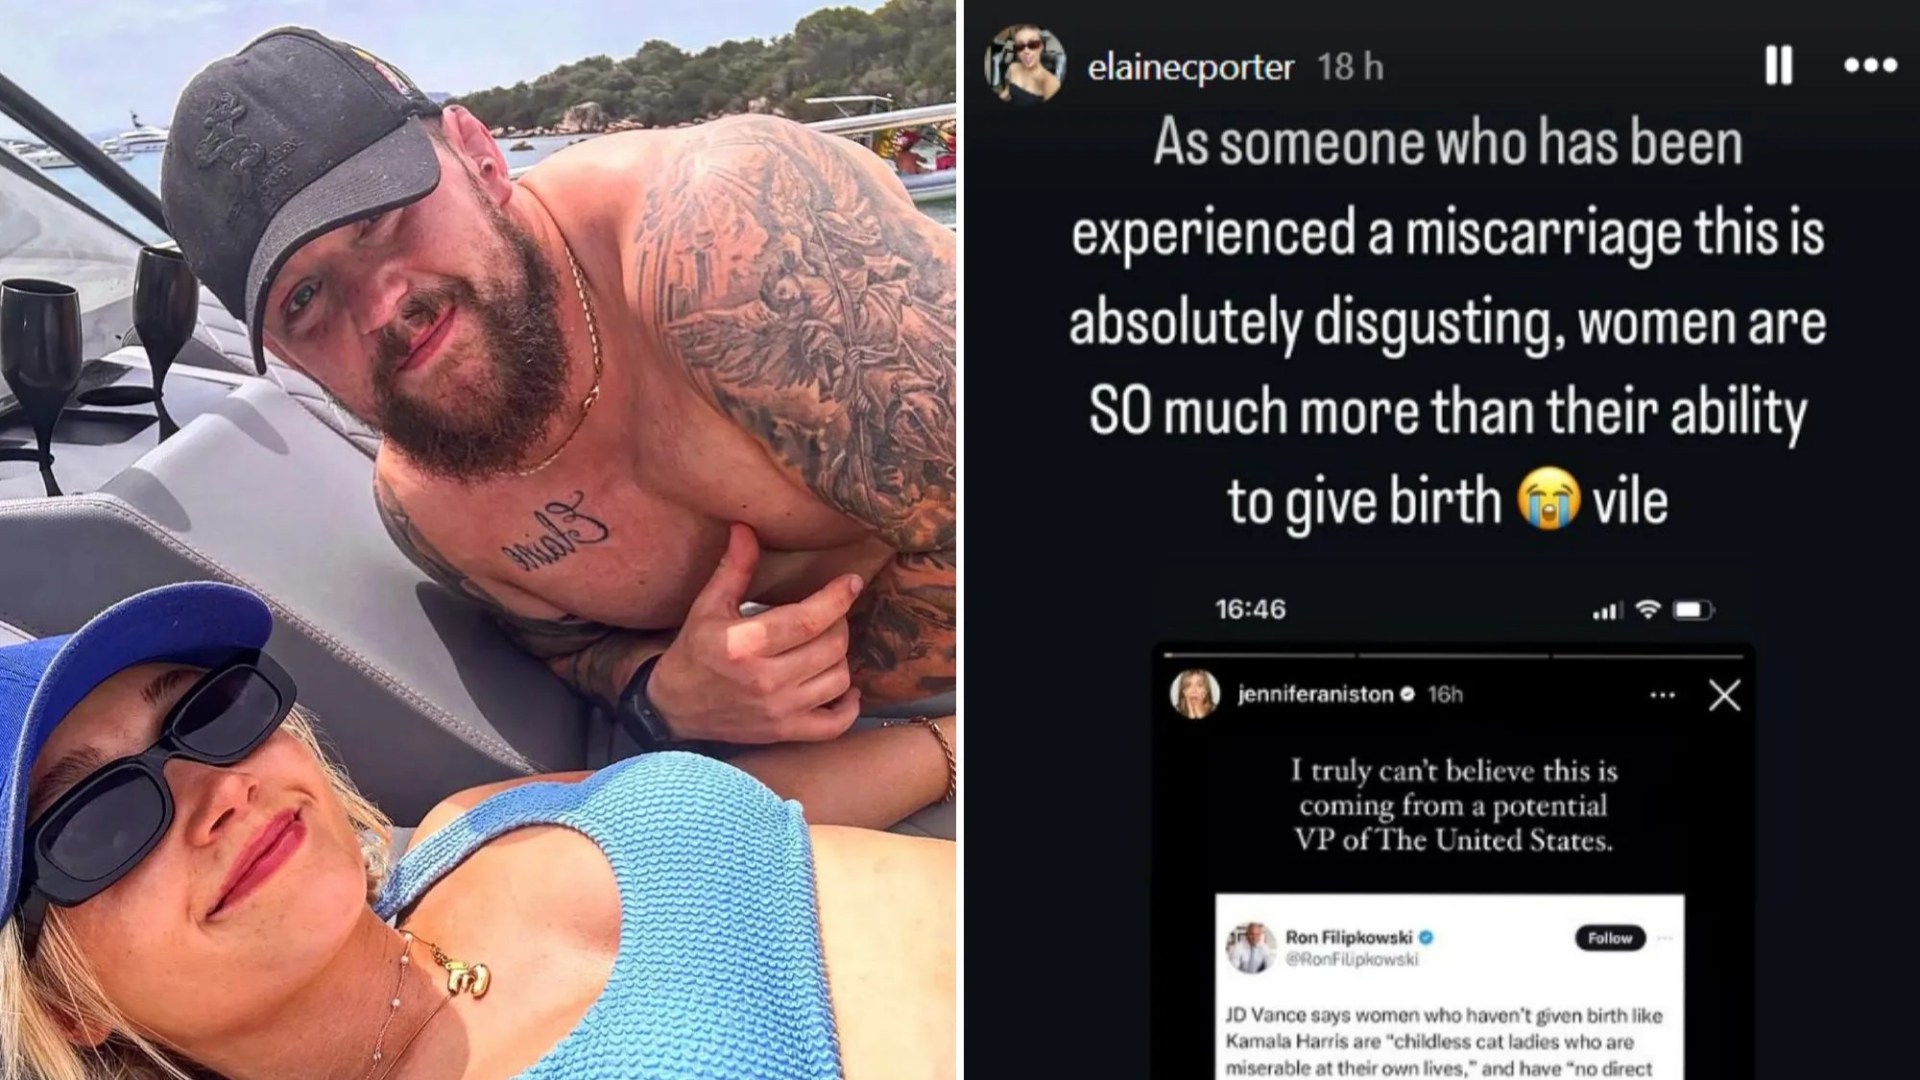 ‘Her strength astounds me’ – Andrew Porter pays emotional tribute to his wife Elaine after her brave miscarriage reveal [Video]